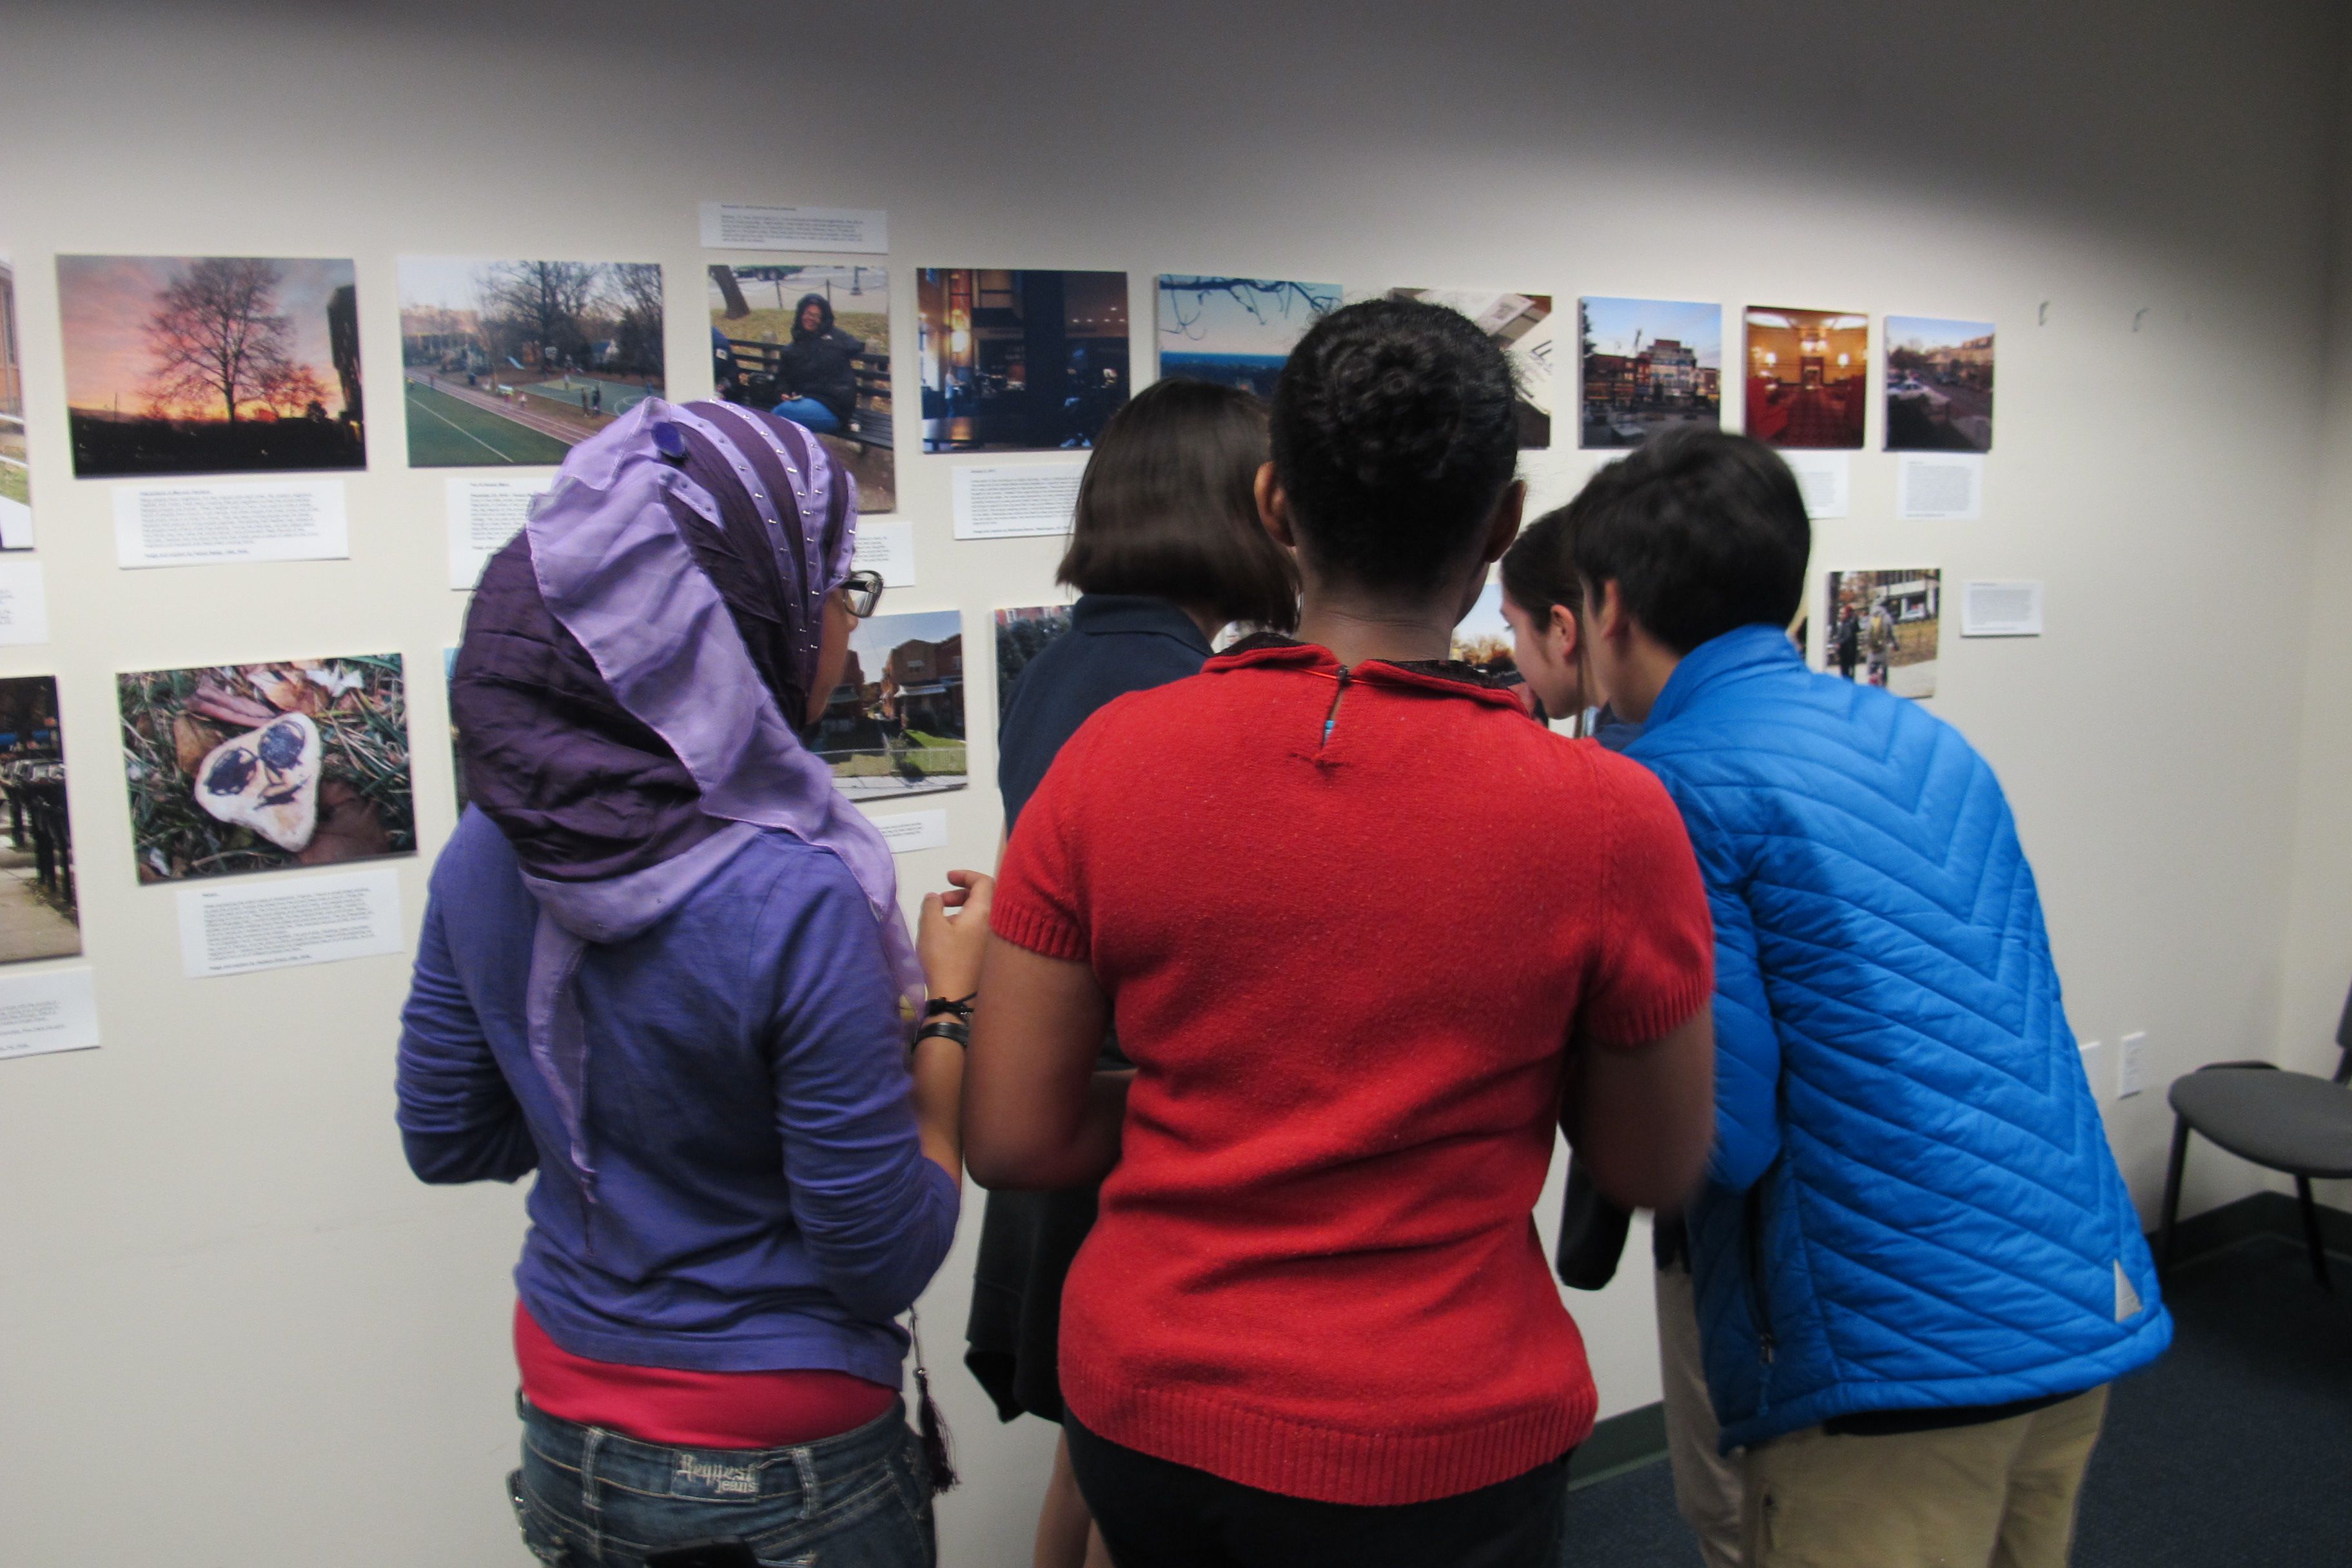 Hardy Middle School students critique one another's work at a reception hosted by the Pulitzer Center. The reception wrapped up a 3-day "Walk Like a Journalist" workshop where students practiced slow reporting, followed in the footsteps of Paul Salopek's "Out of Eden Walk". Image by Perinne Punwani. Washington, D.C., 2017. 